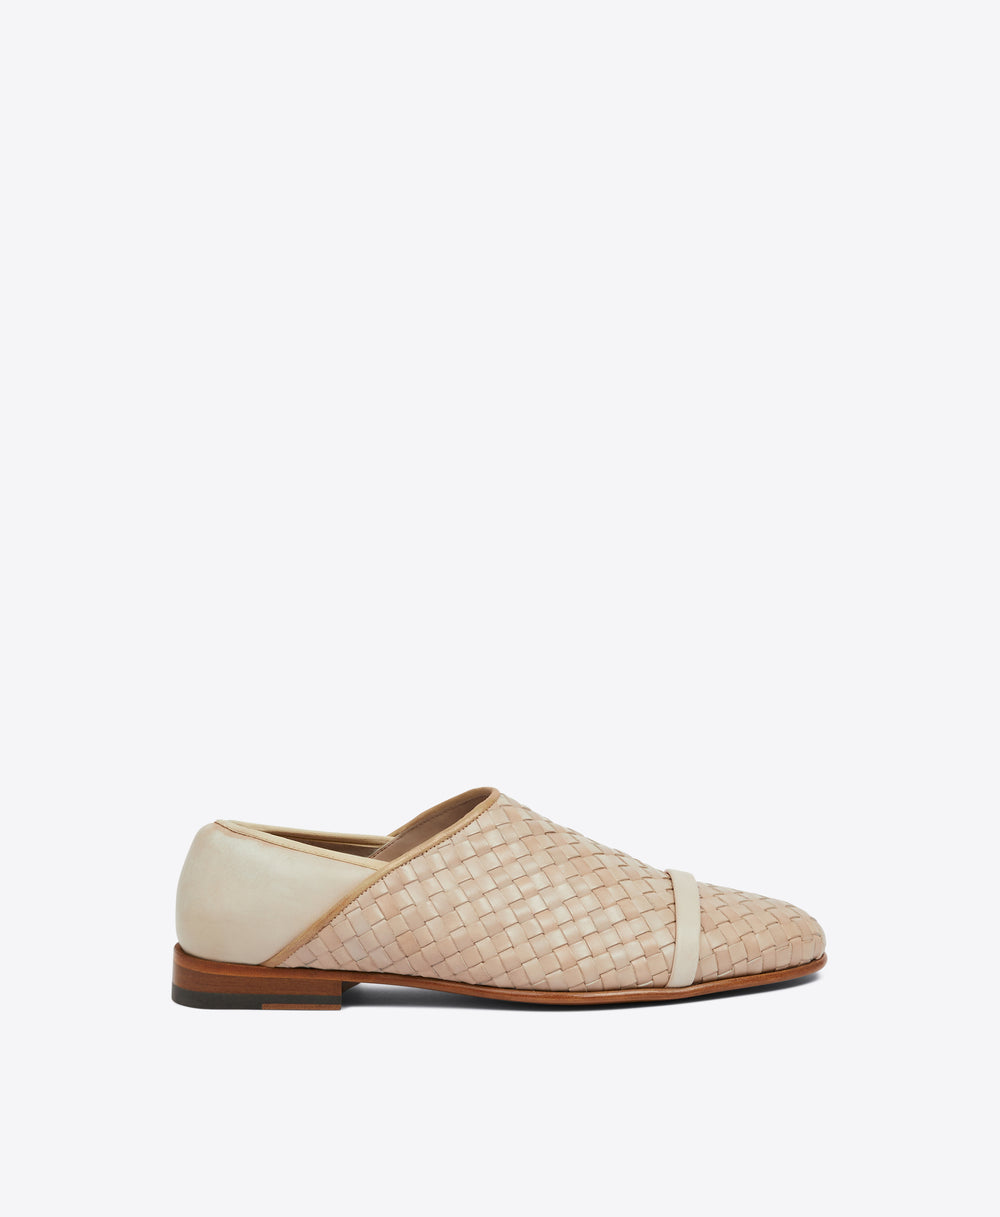 Men's Camel Woven Leather Slippers  Malone Souliers